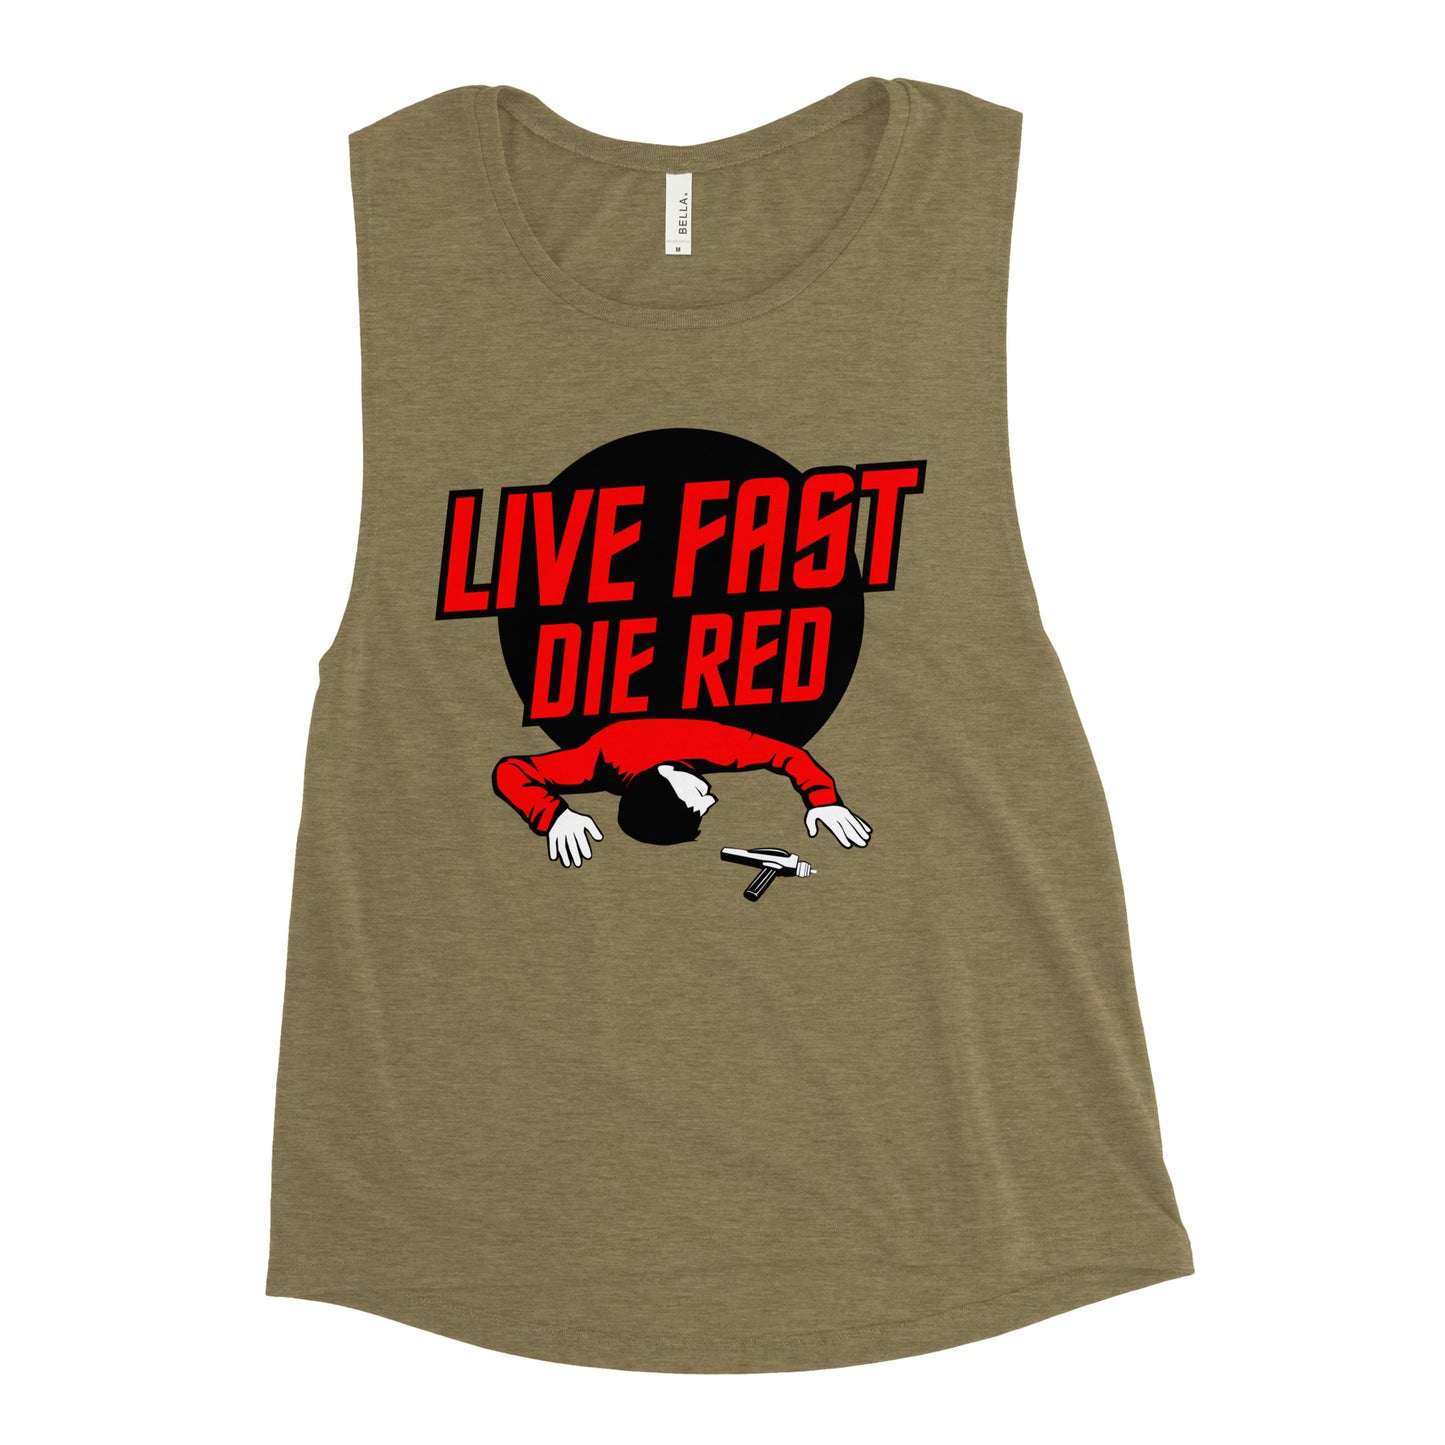 Live Fast Die Red Women's Muscle Tank